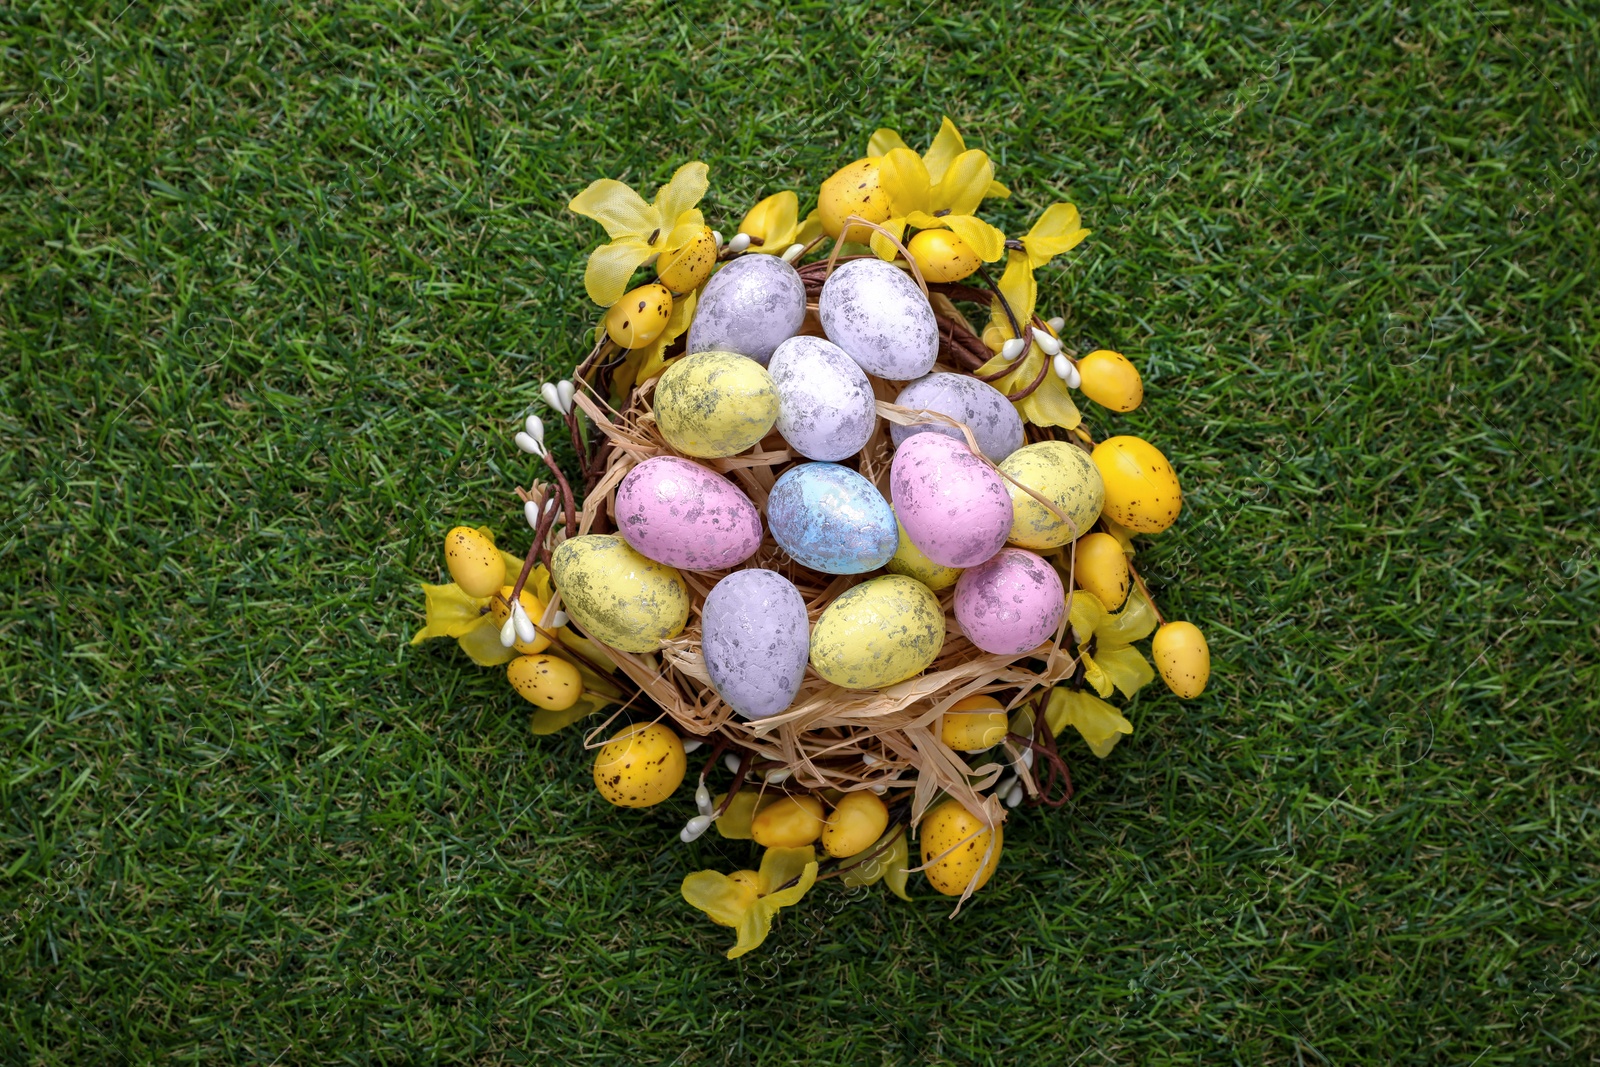 Photo of Festively decorated Easter eggs on green grass, top view